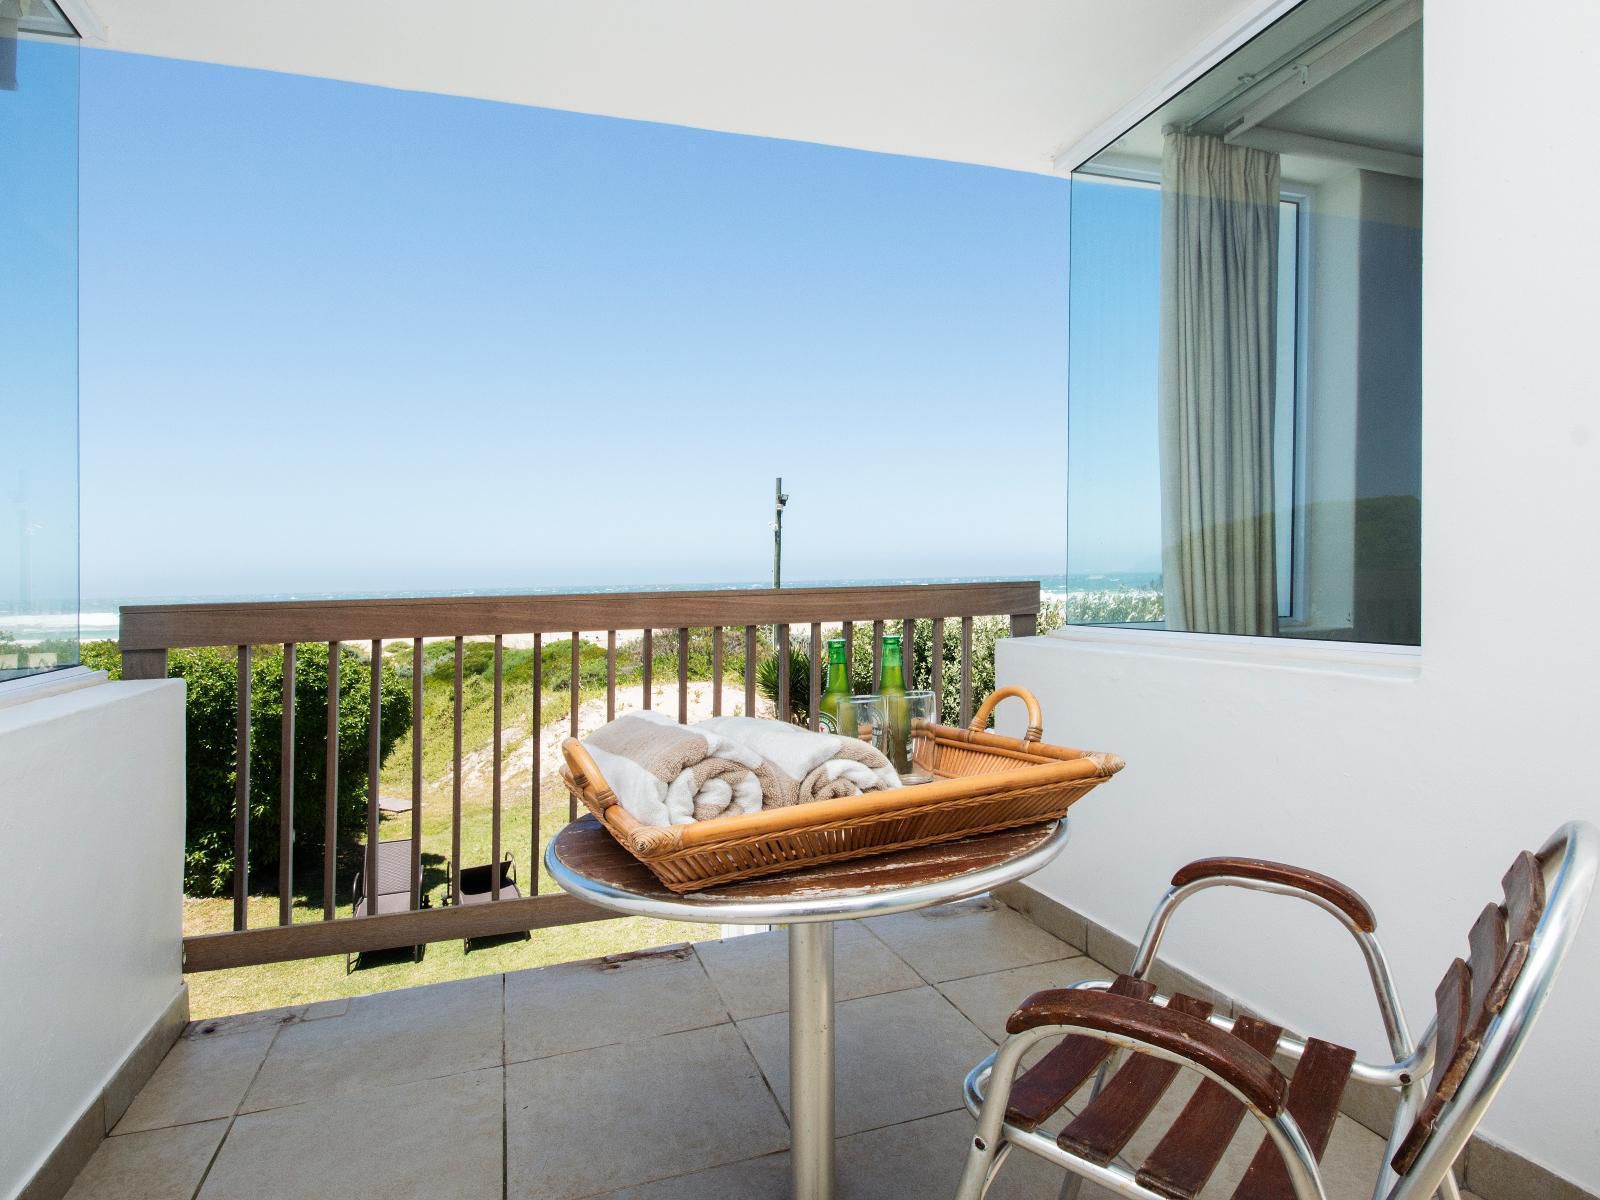 Beach Break Guest Houses And Villas Cape St Francis Eastern Cape South Africa Balcony, Architecture, Beach, Nature, Sand